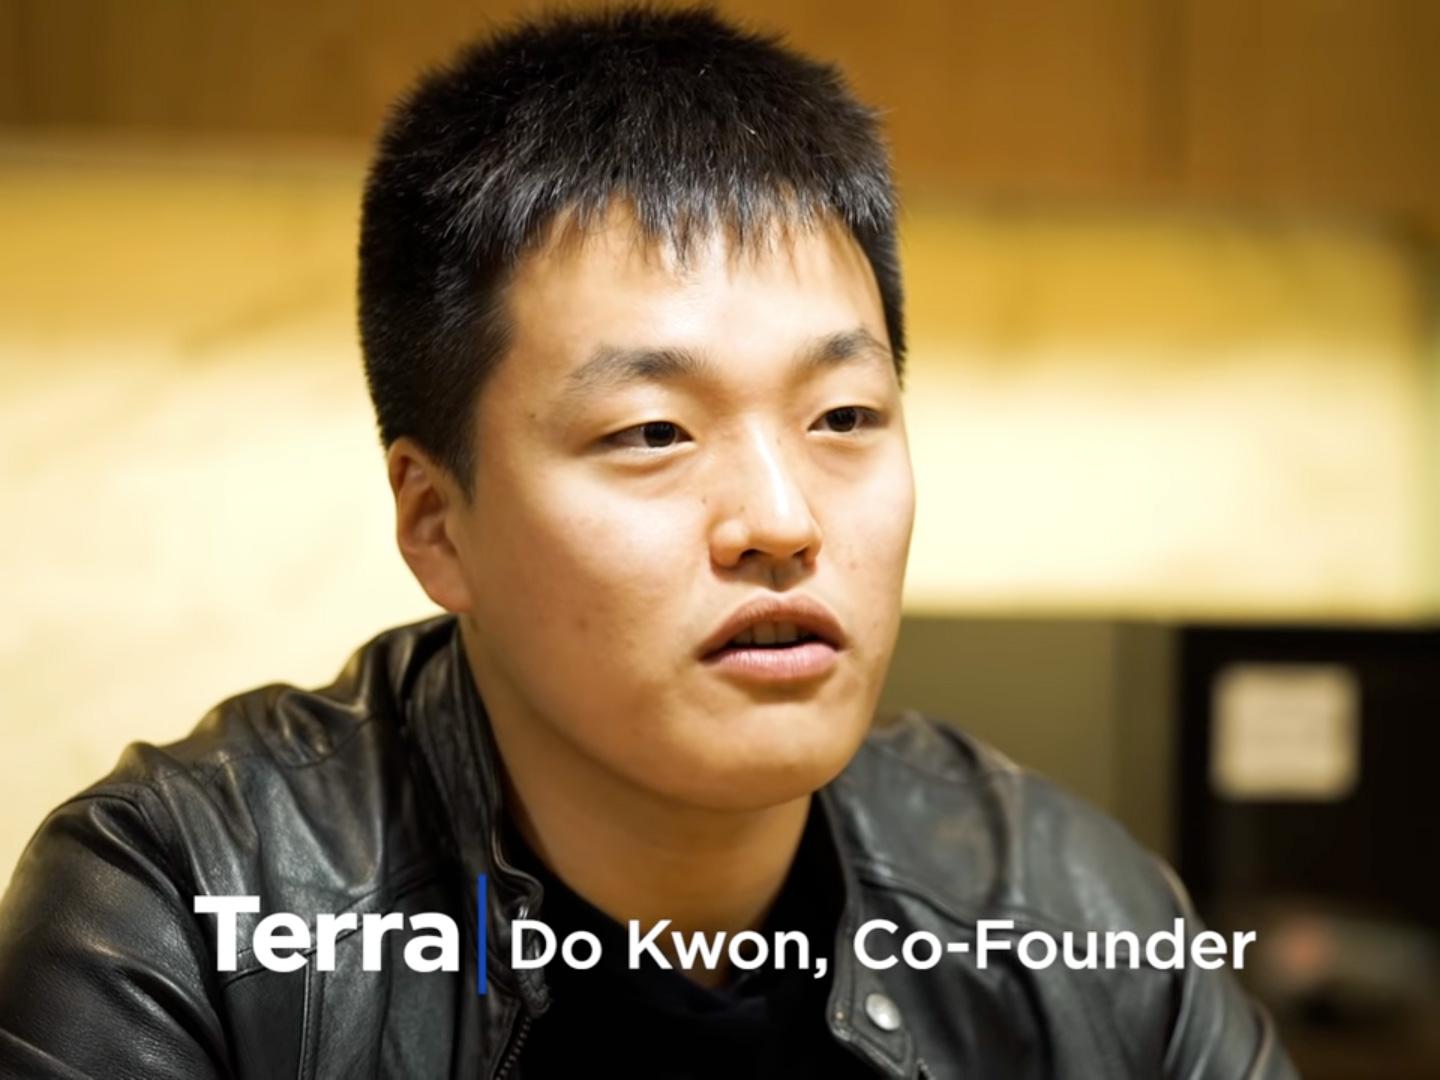 Terra co-founder Do Kwon may have been arrested in Montenegro